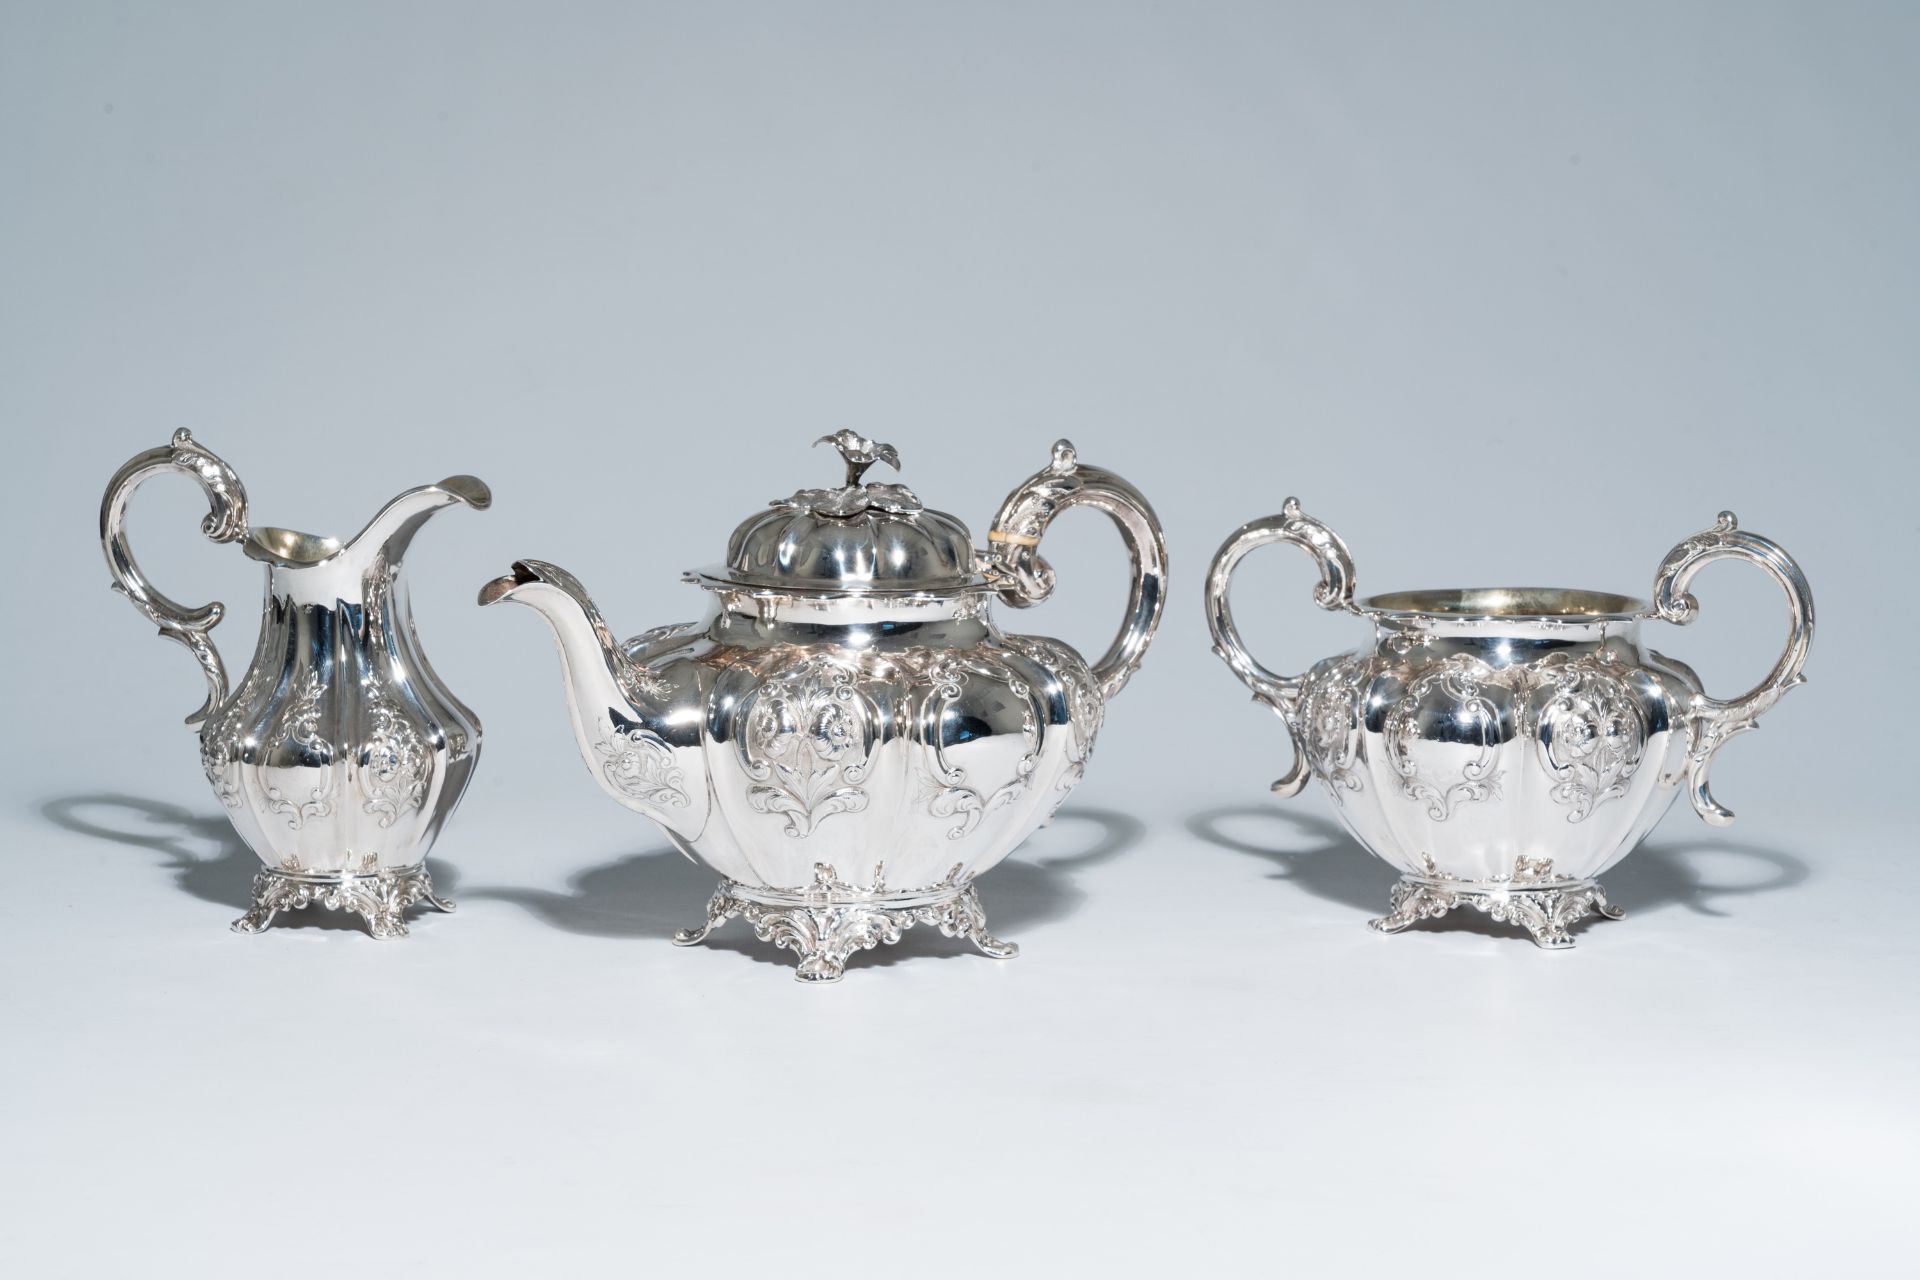 A three-piece English Victorian silver tea set with floral relief design, maker's mark Hayne and Car